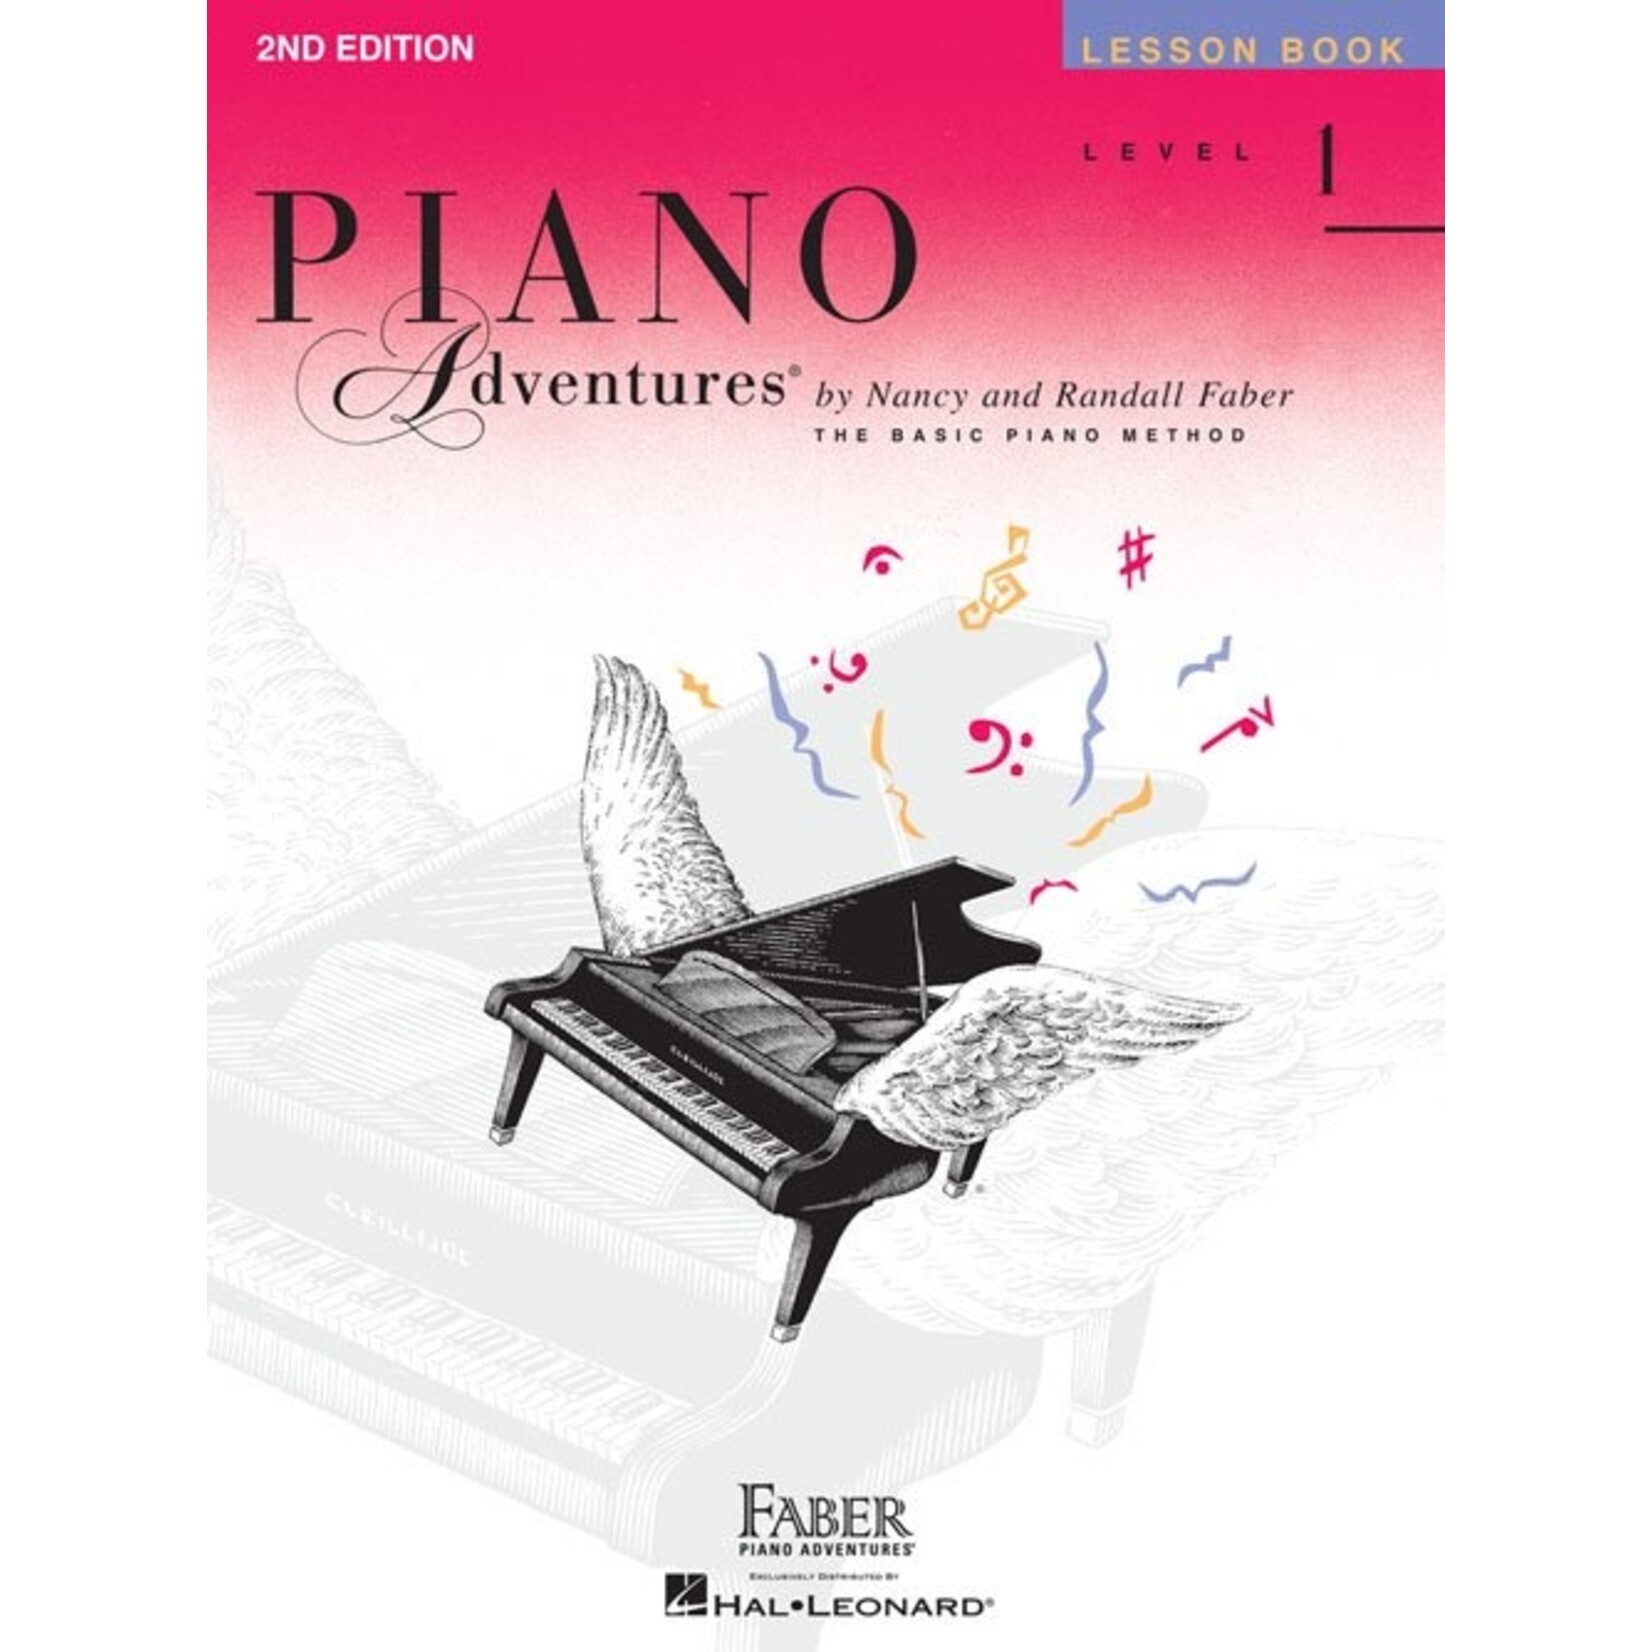 Faber Piano Adventures Level 1 - Lesson Book - Faber 2nd Edition